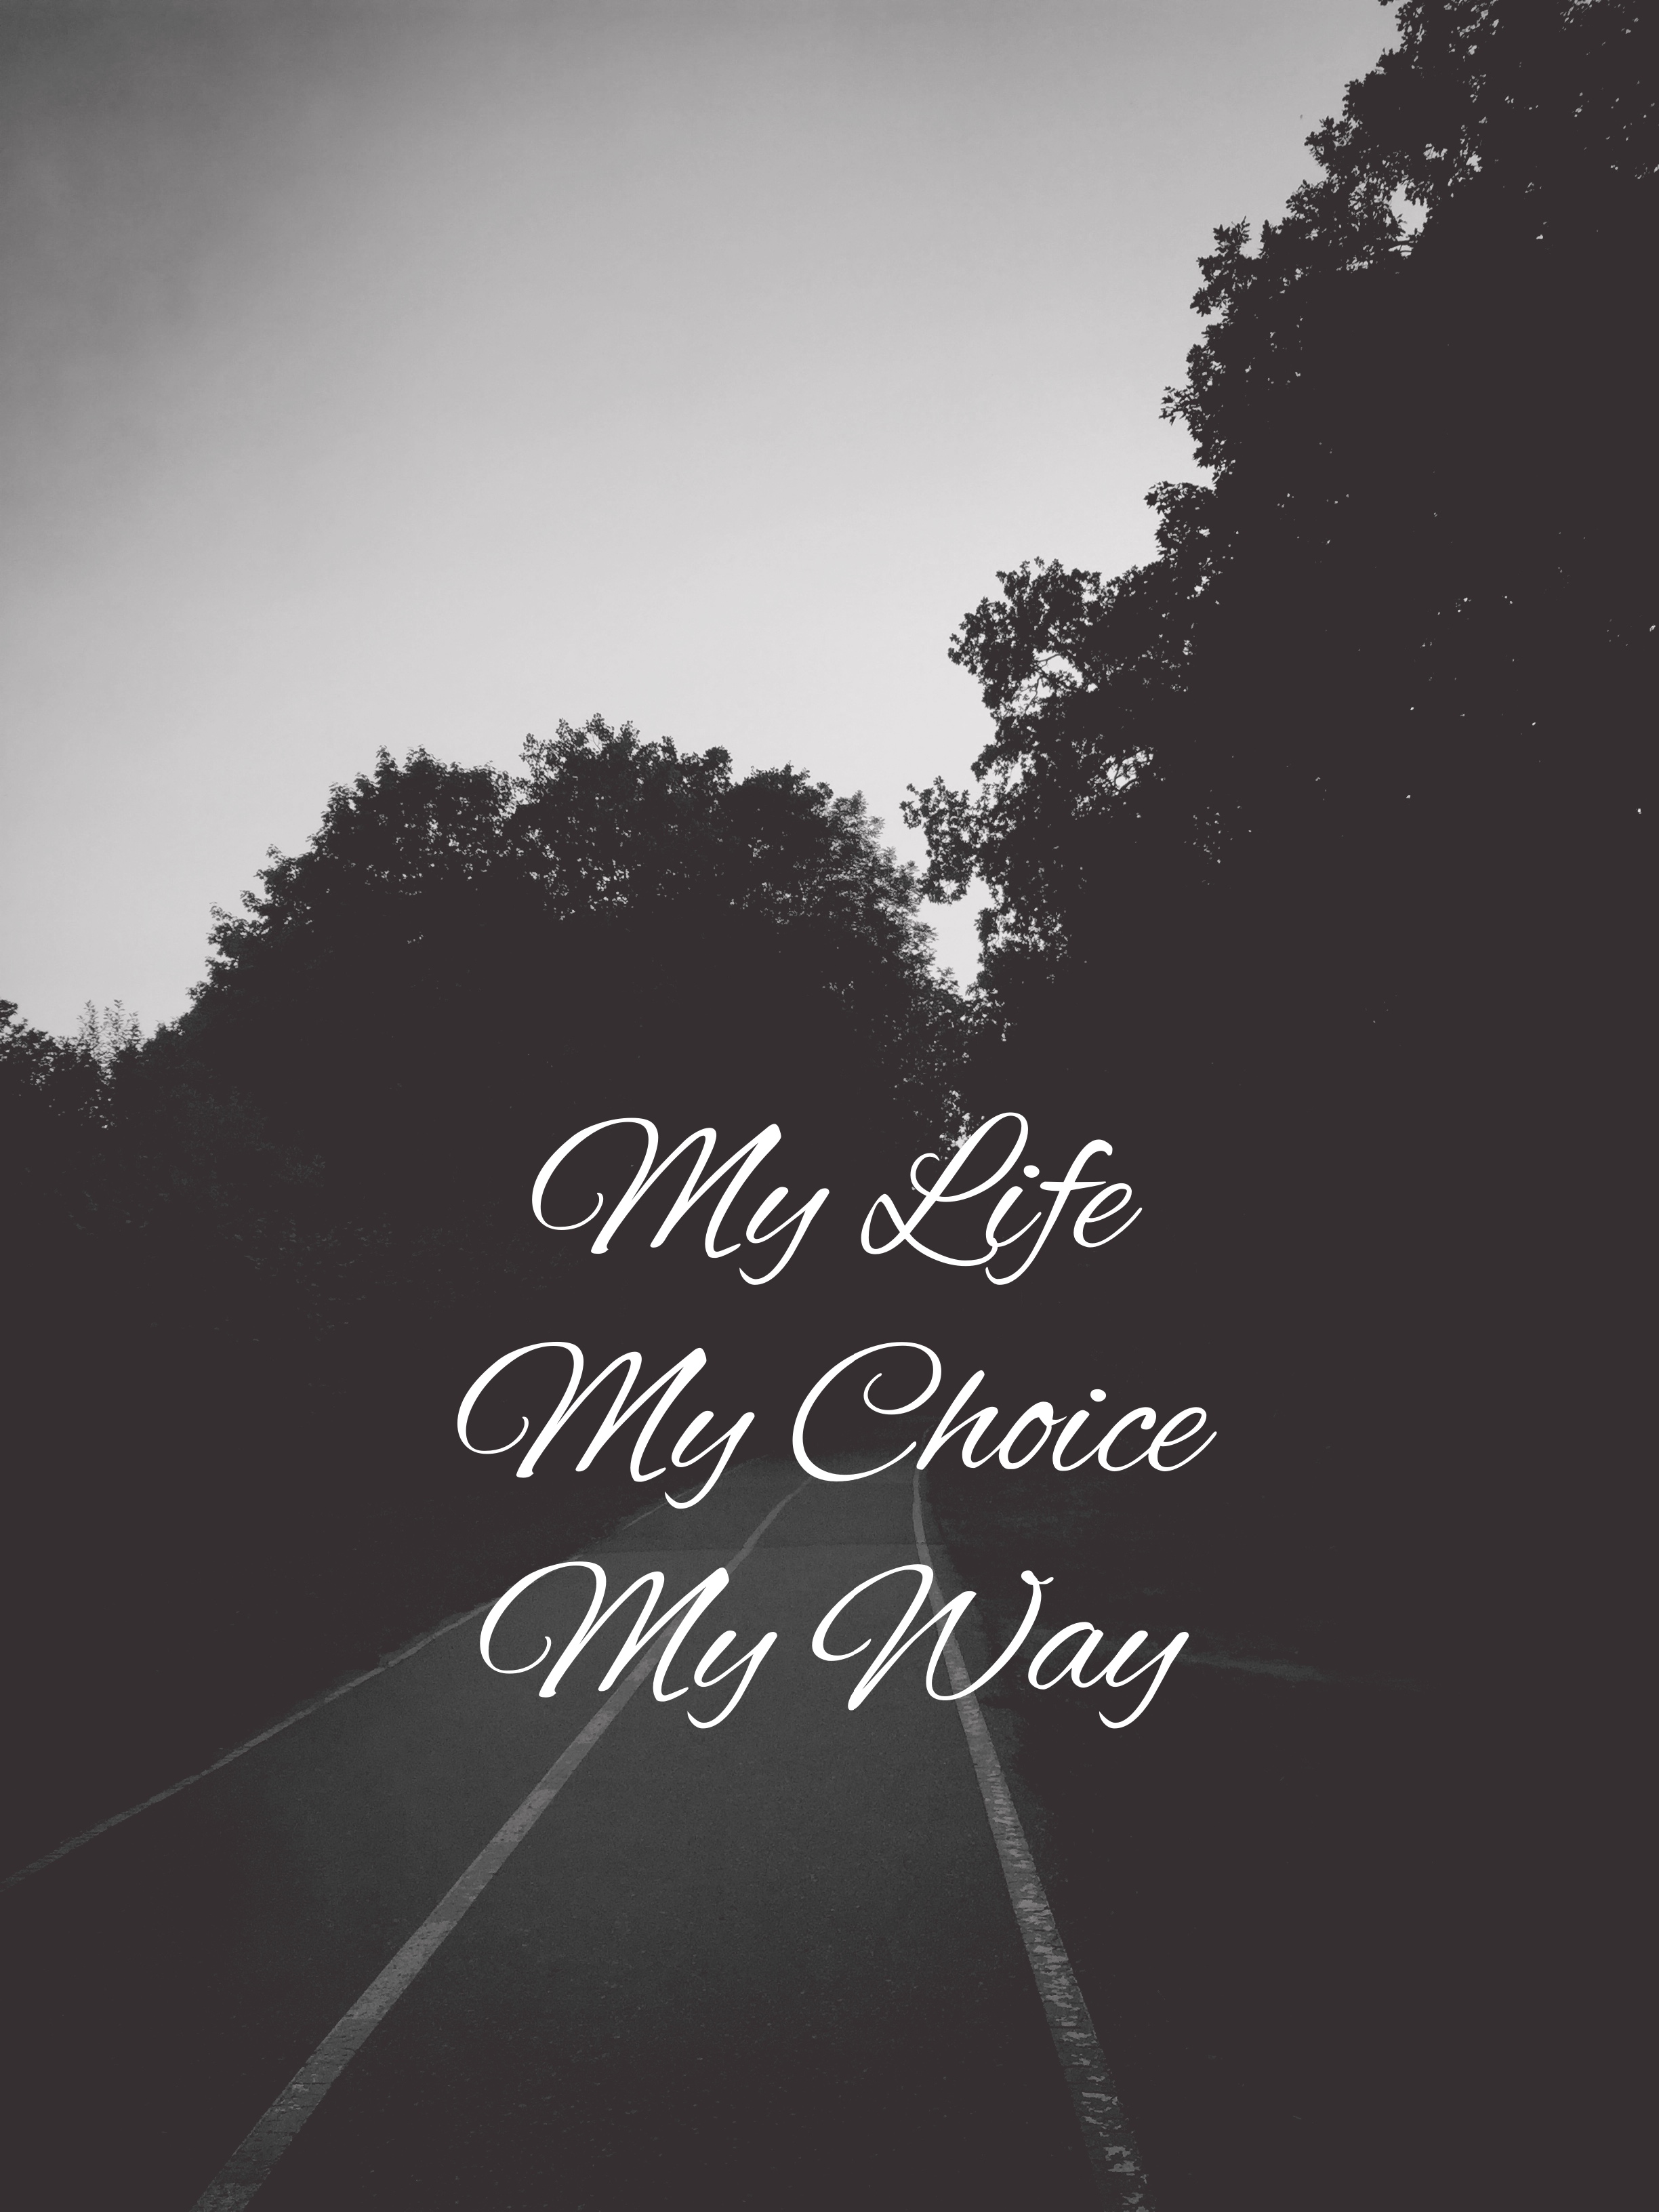 Free HD text, bw, quotation, quote, chb, words, inscription, road, path, way